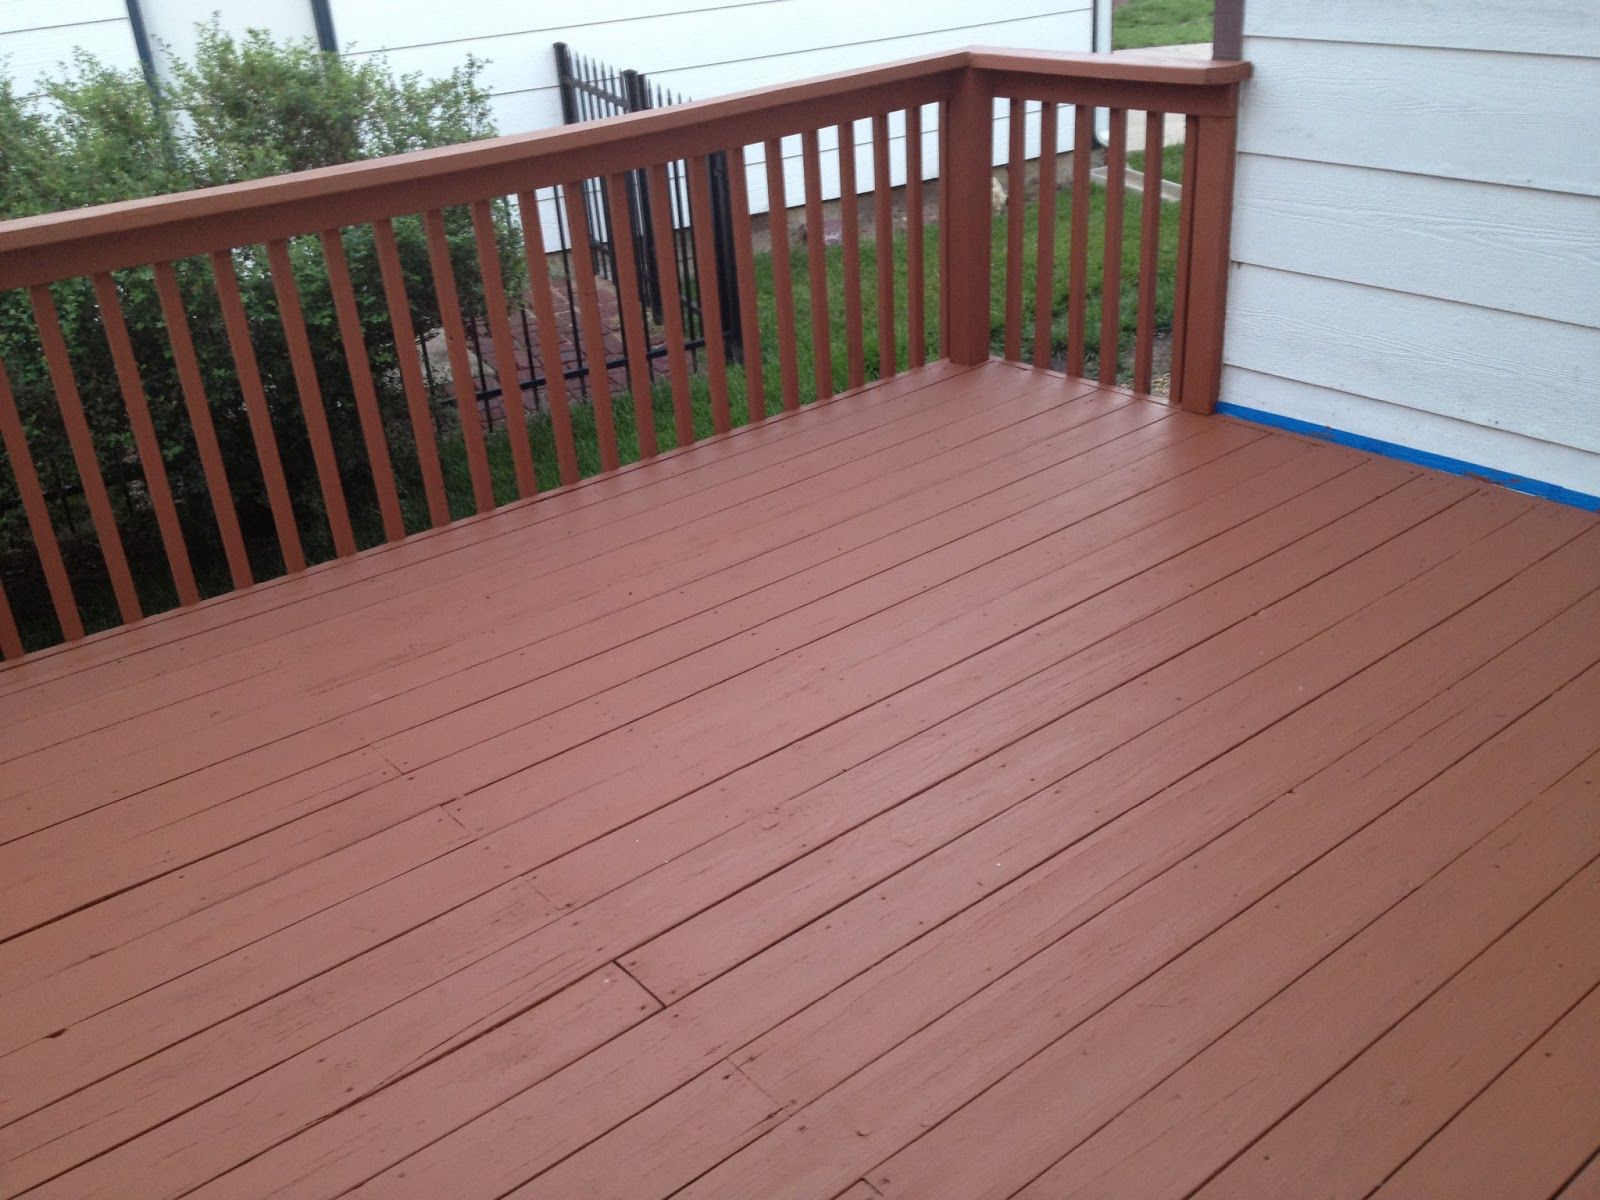 Behr Deckover Cappuccino Solid Color Behr Weatherproof Wood Stain within measurements 1600 X 1200